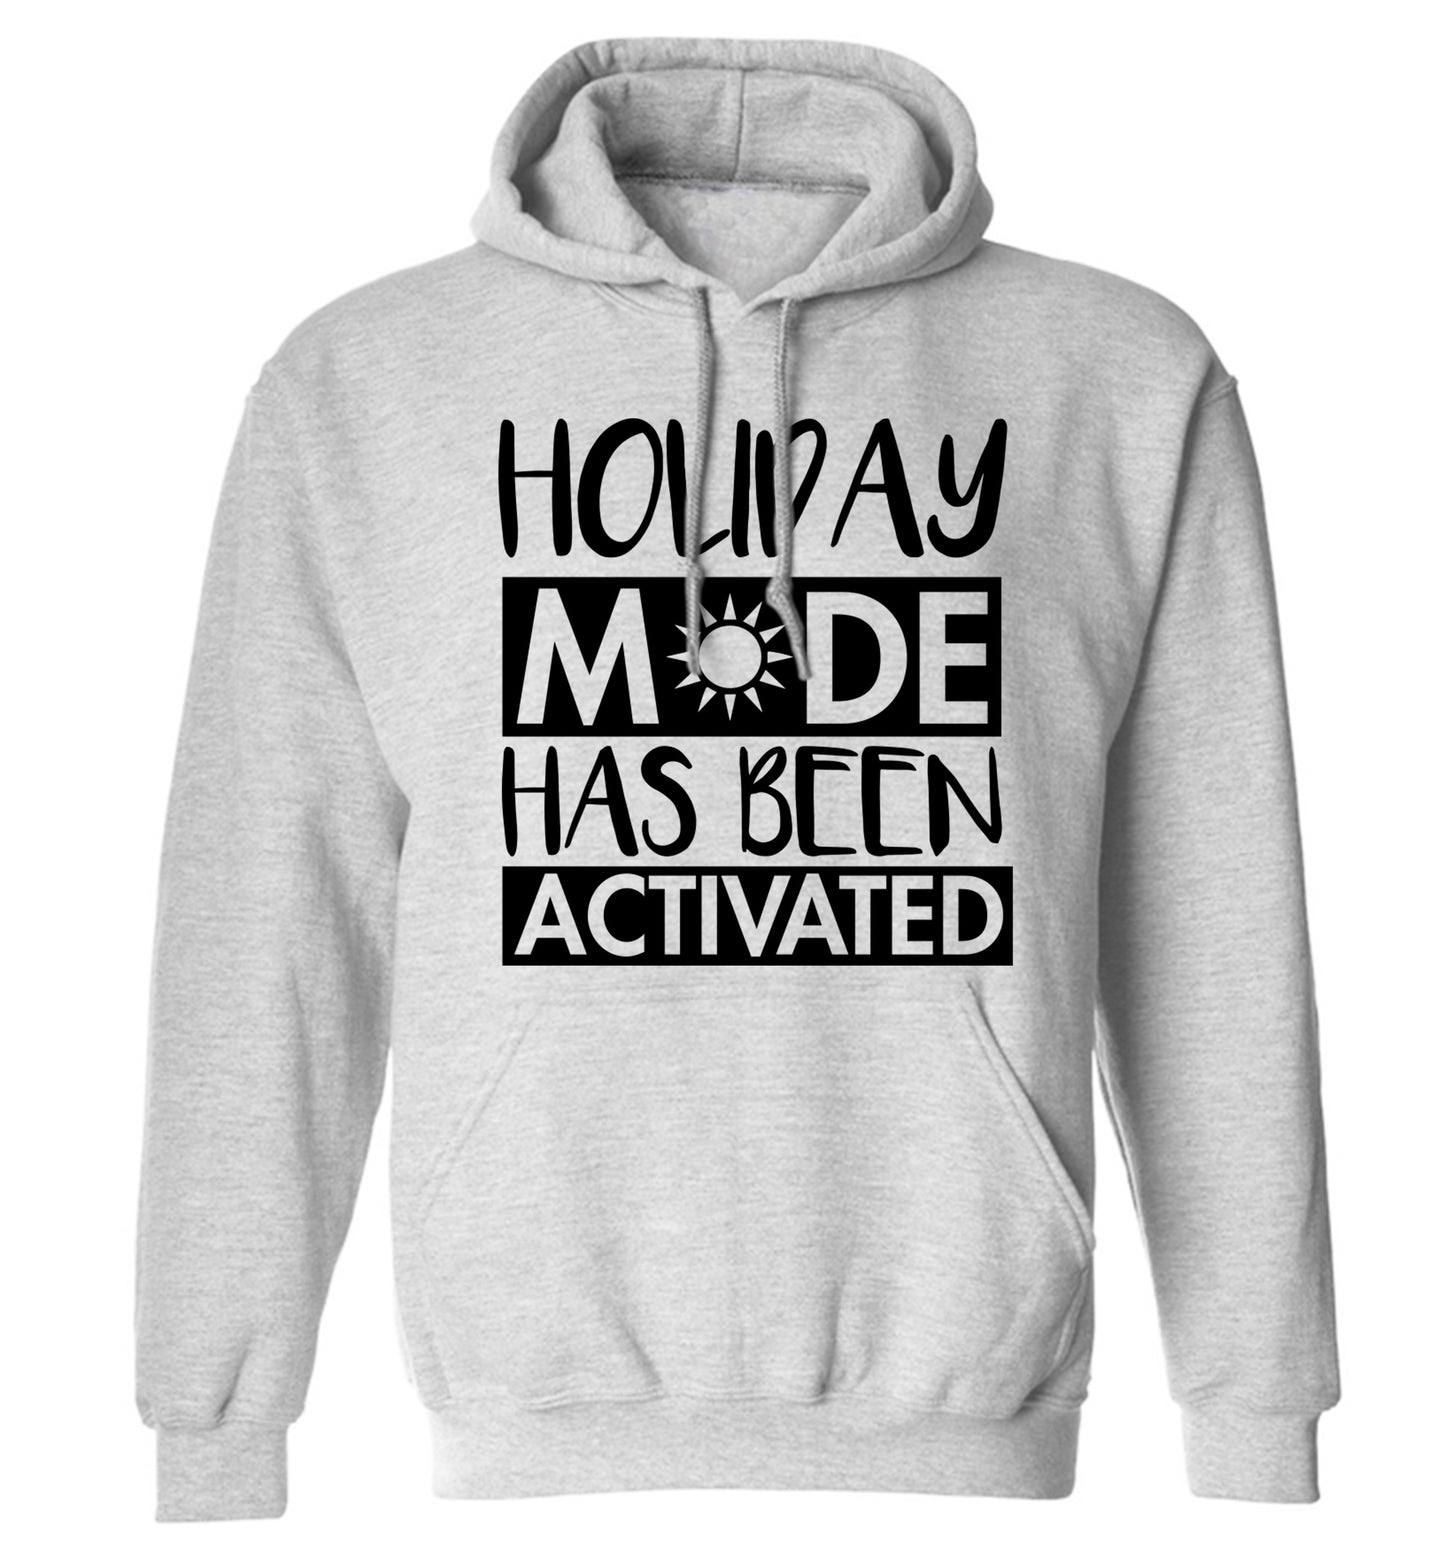 Holiday mode has been activated adults unisex grey hoodie 2XL